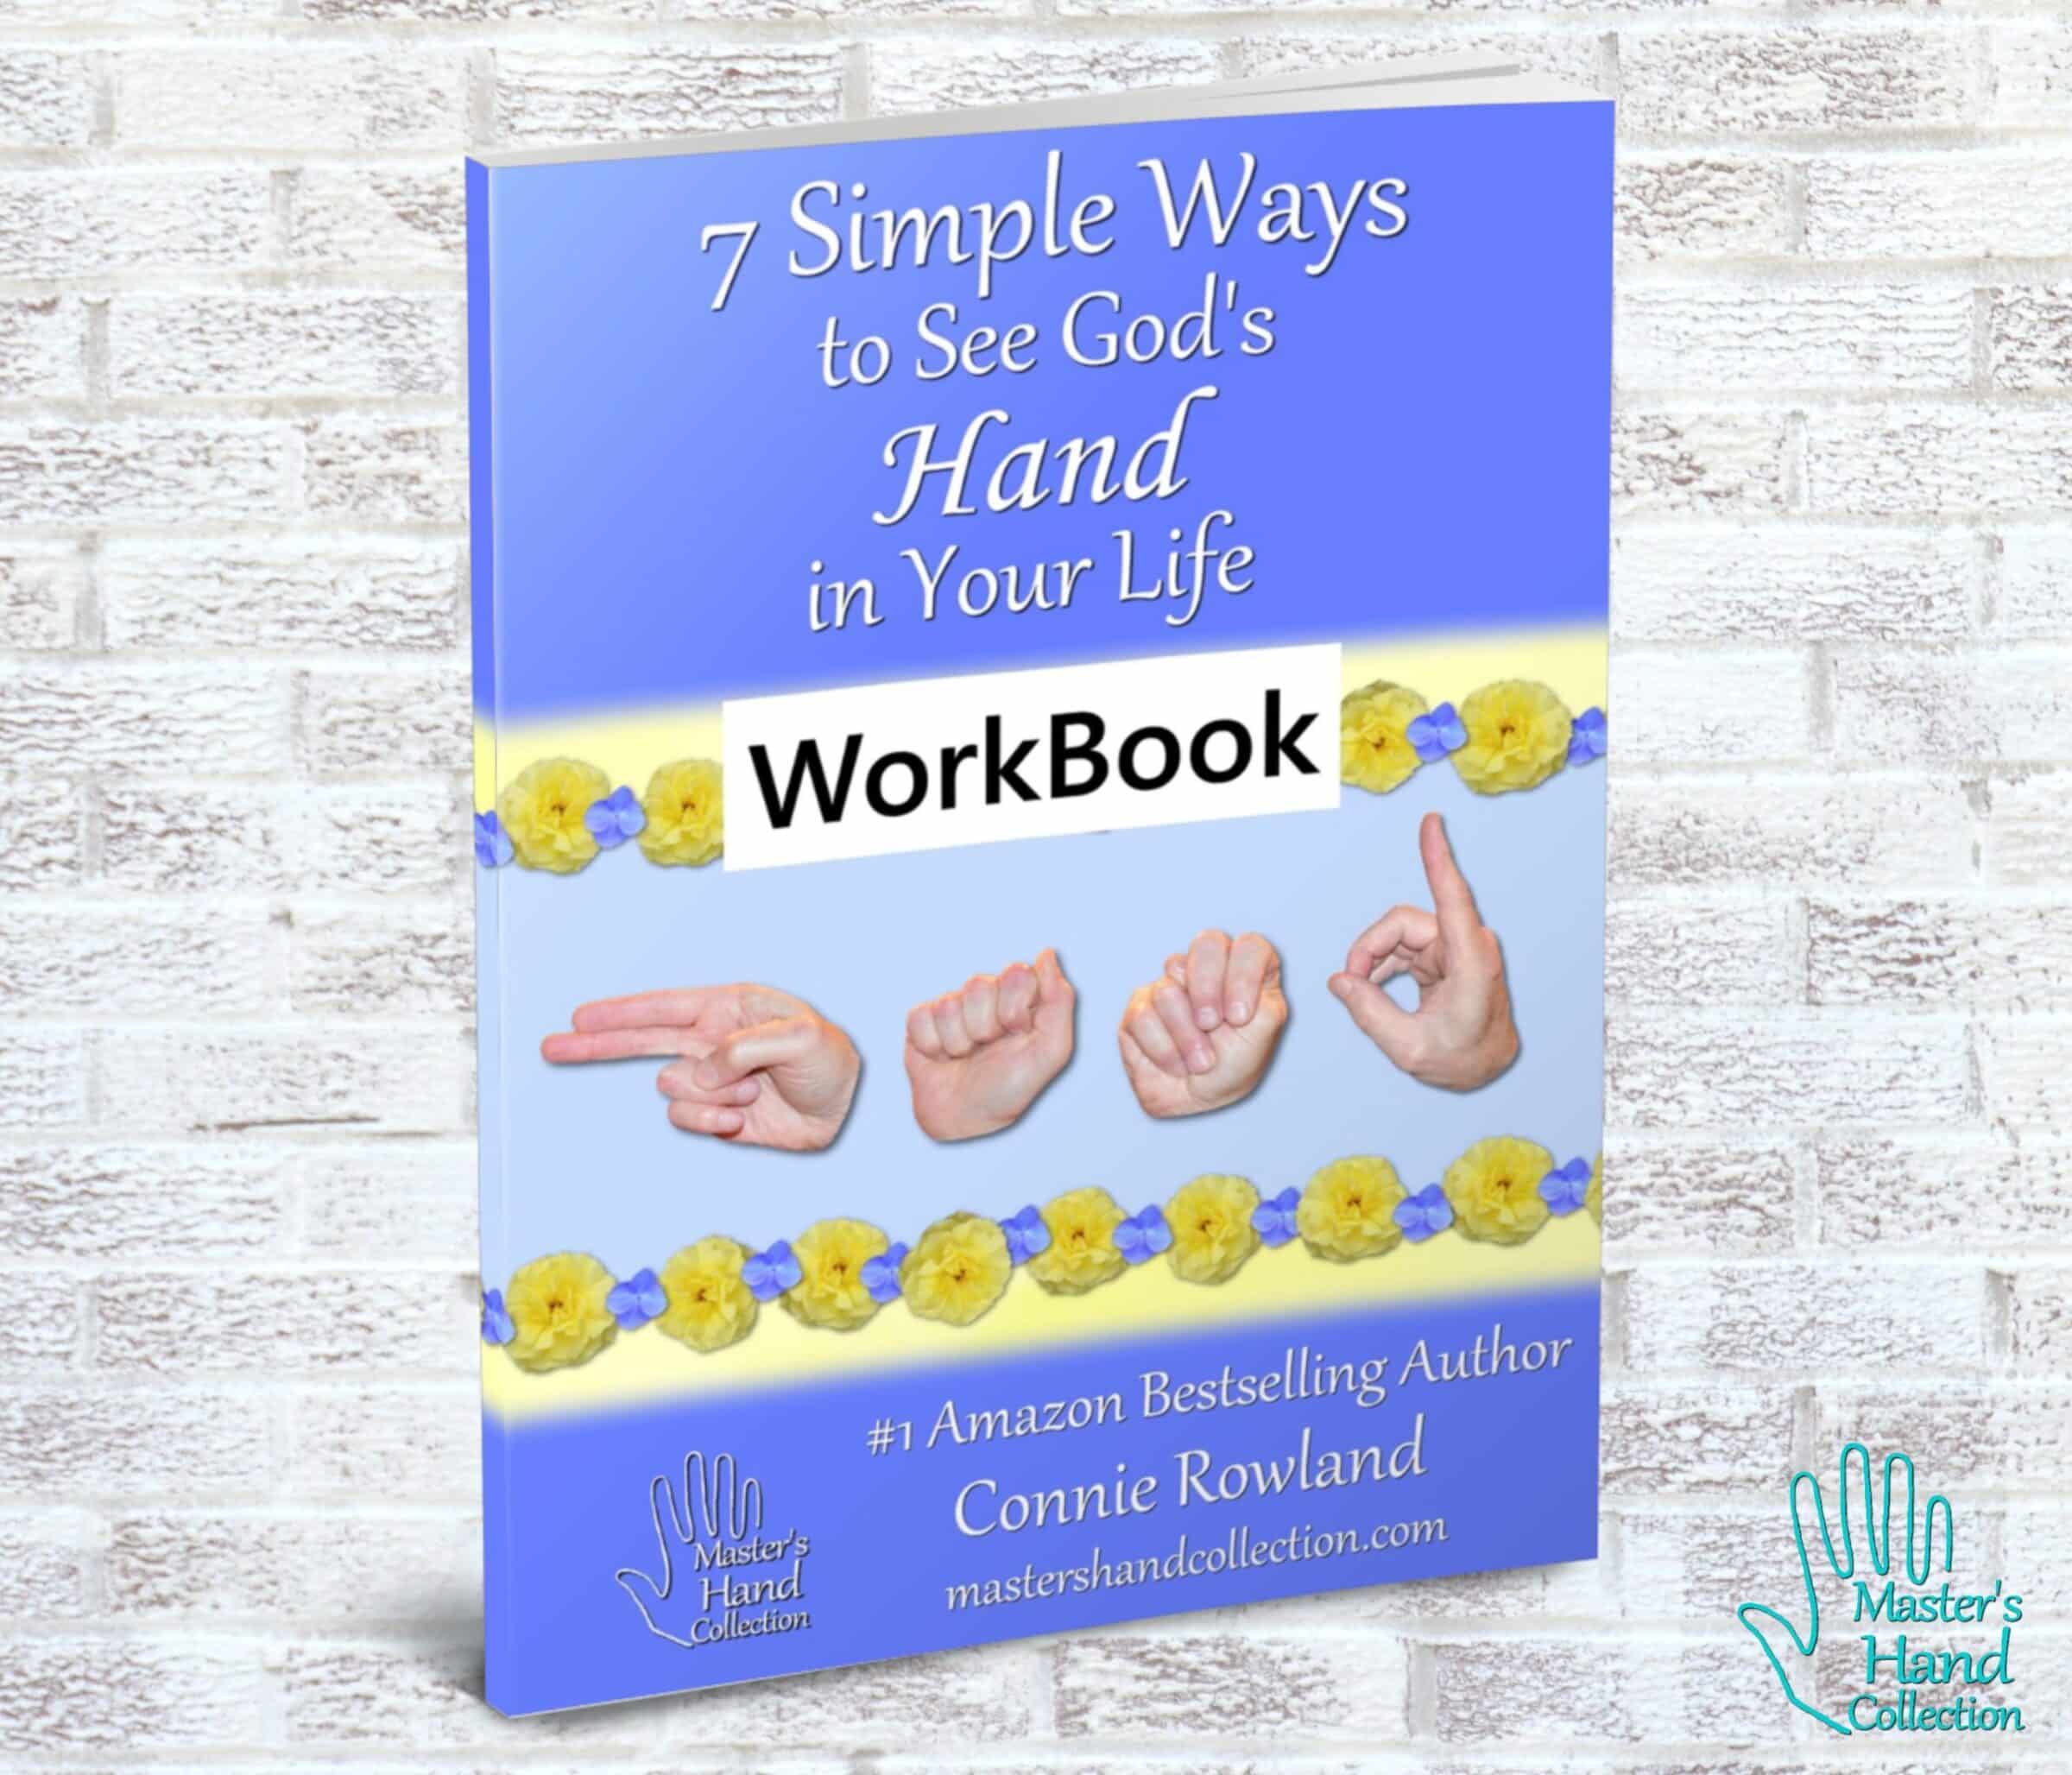 7 Simple Ways to See God's Hand in Your Life Workbook